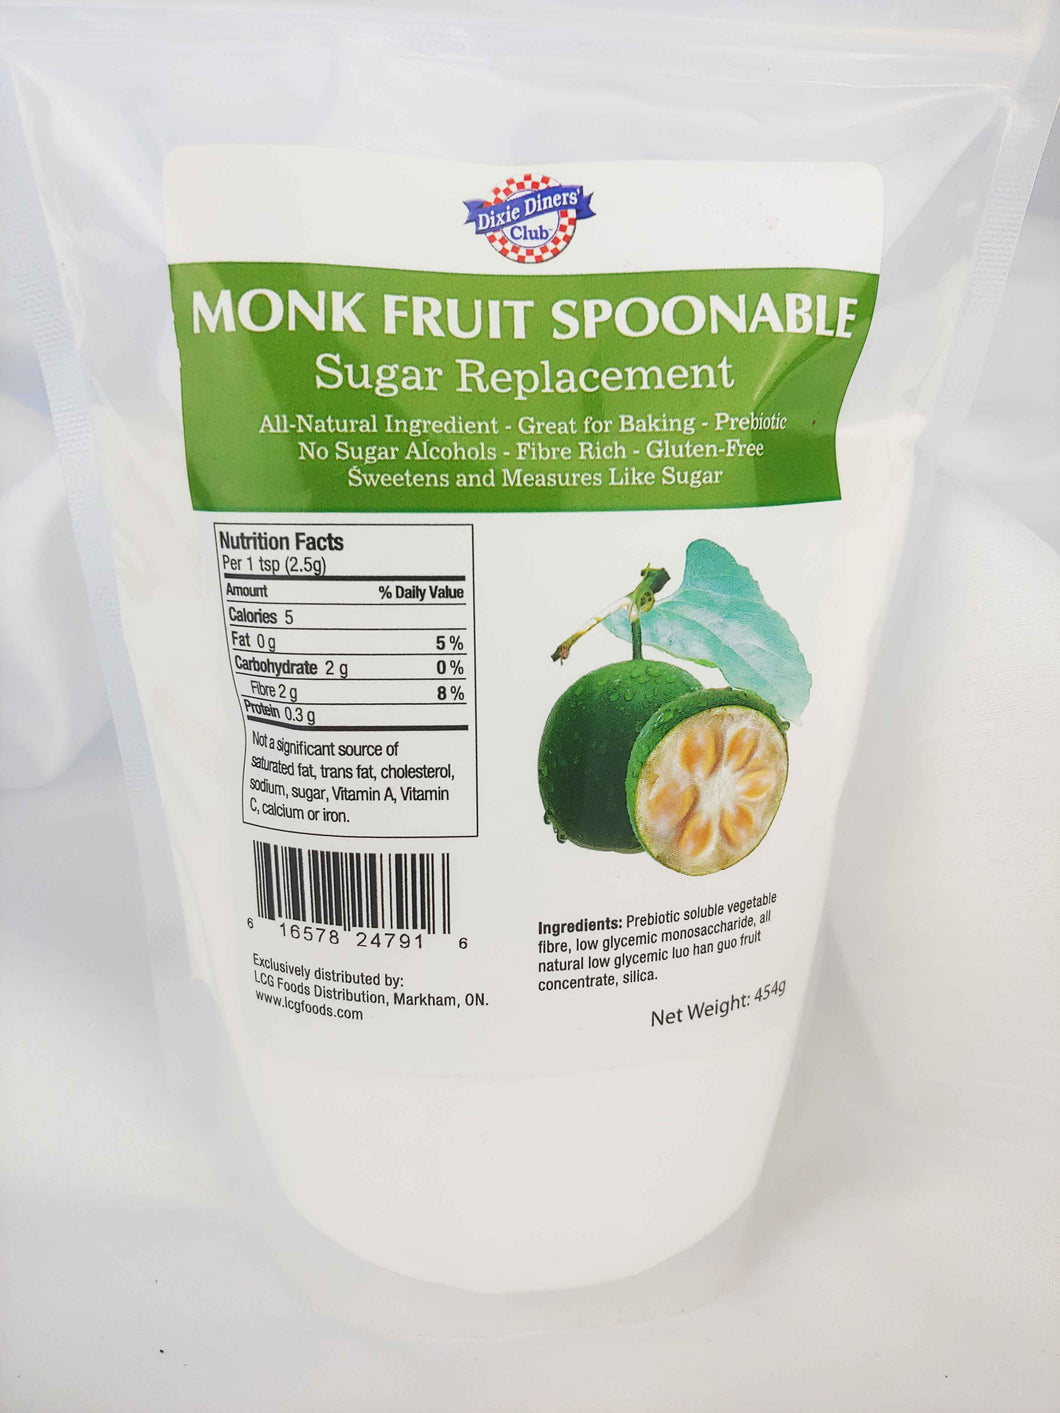 Dixie Diners' Monk Fruit Spoonable Sugar Replacement